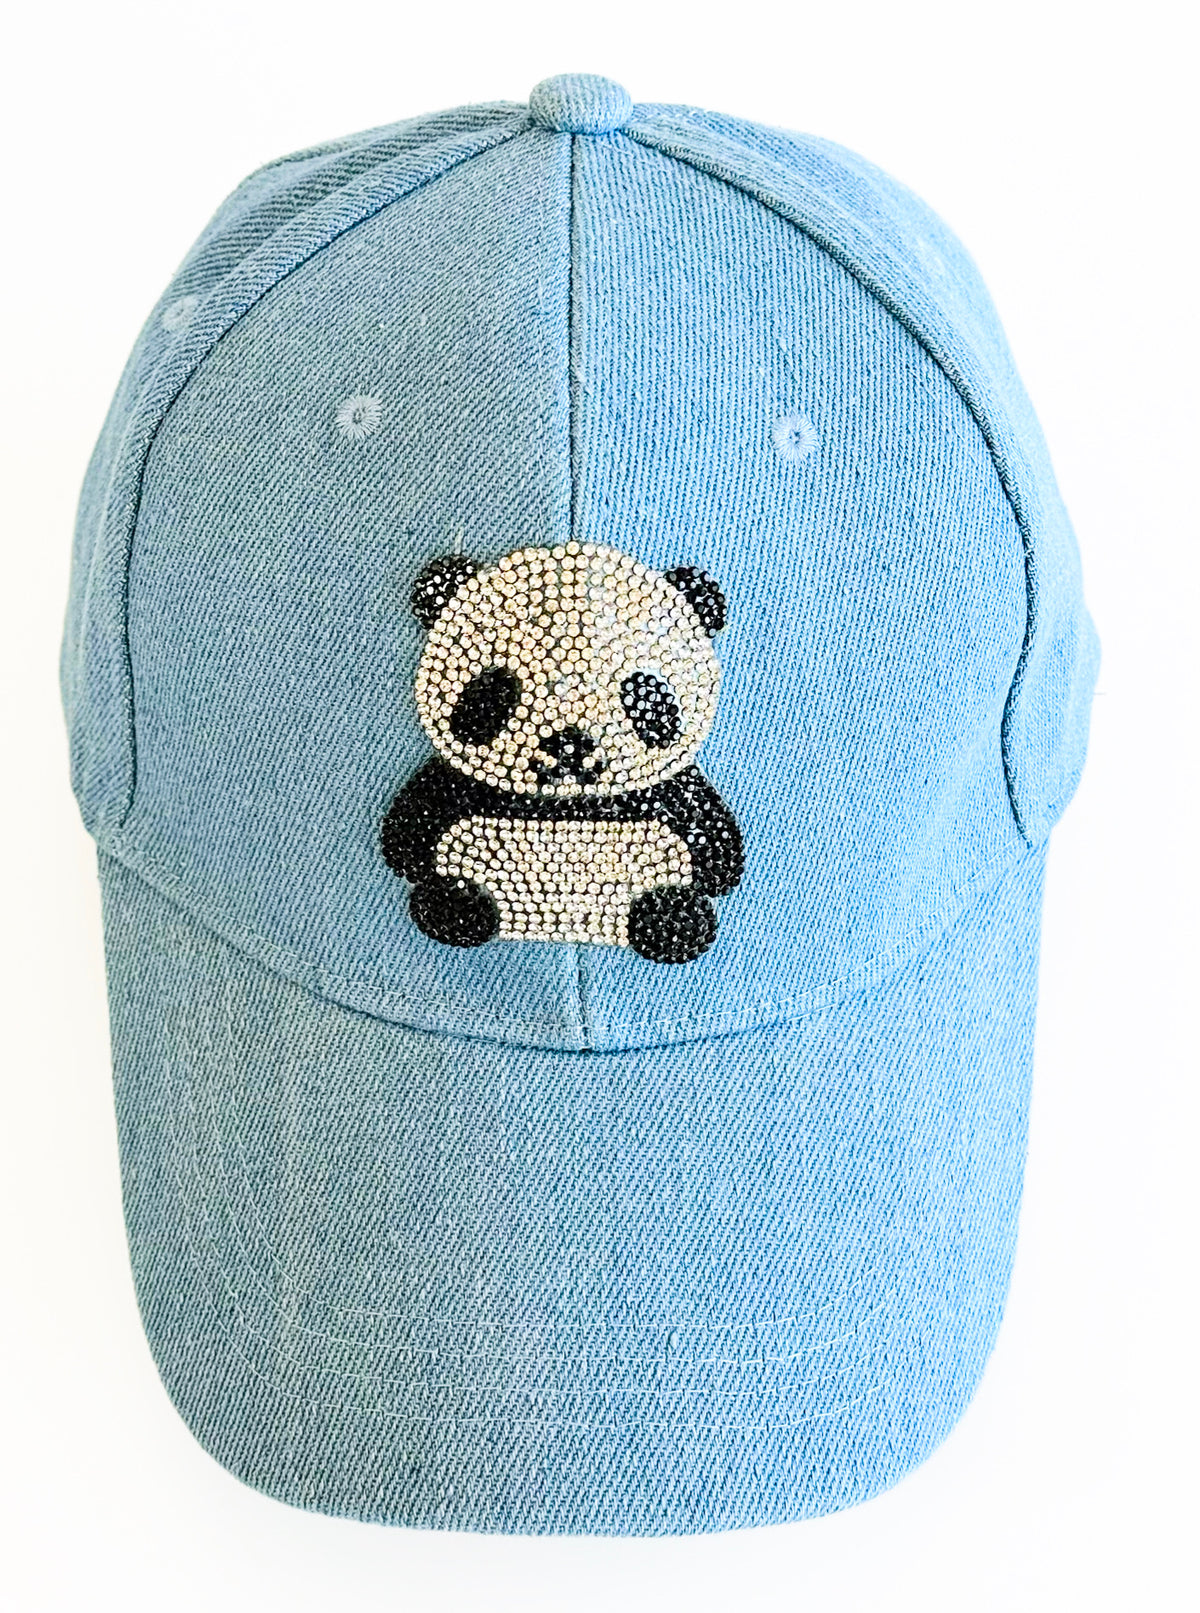 CB Exclusive Panda Denim Hat - Light Blue-260 Other Accessories-AppleJuice Accessories by Glamoure-Coastal Bloom Boutique, find the trendiest versions of the popular styles and looks Located in Indialantic, FL